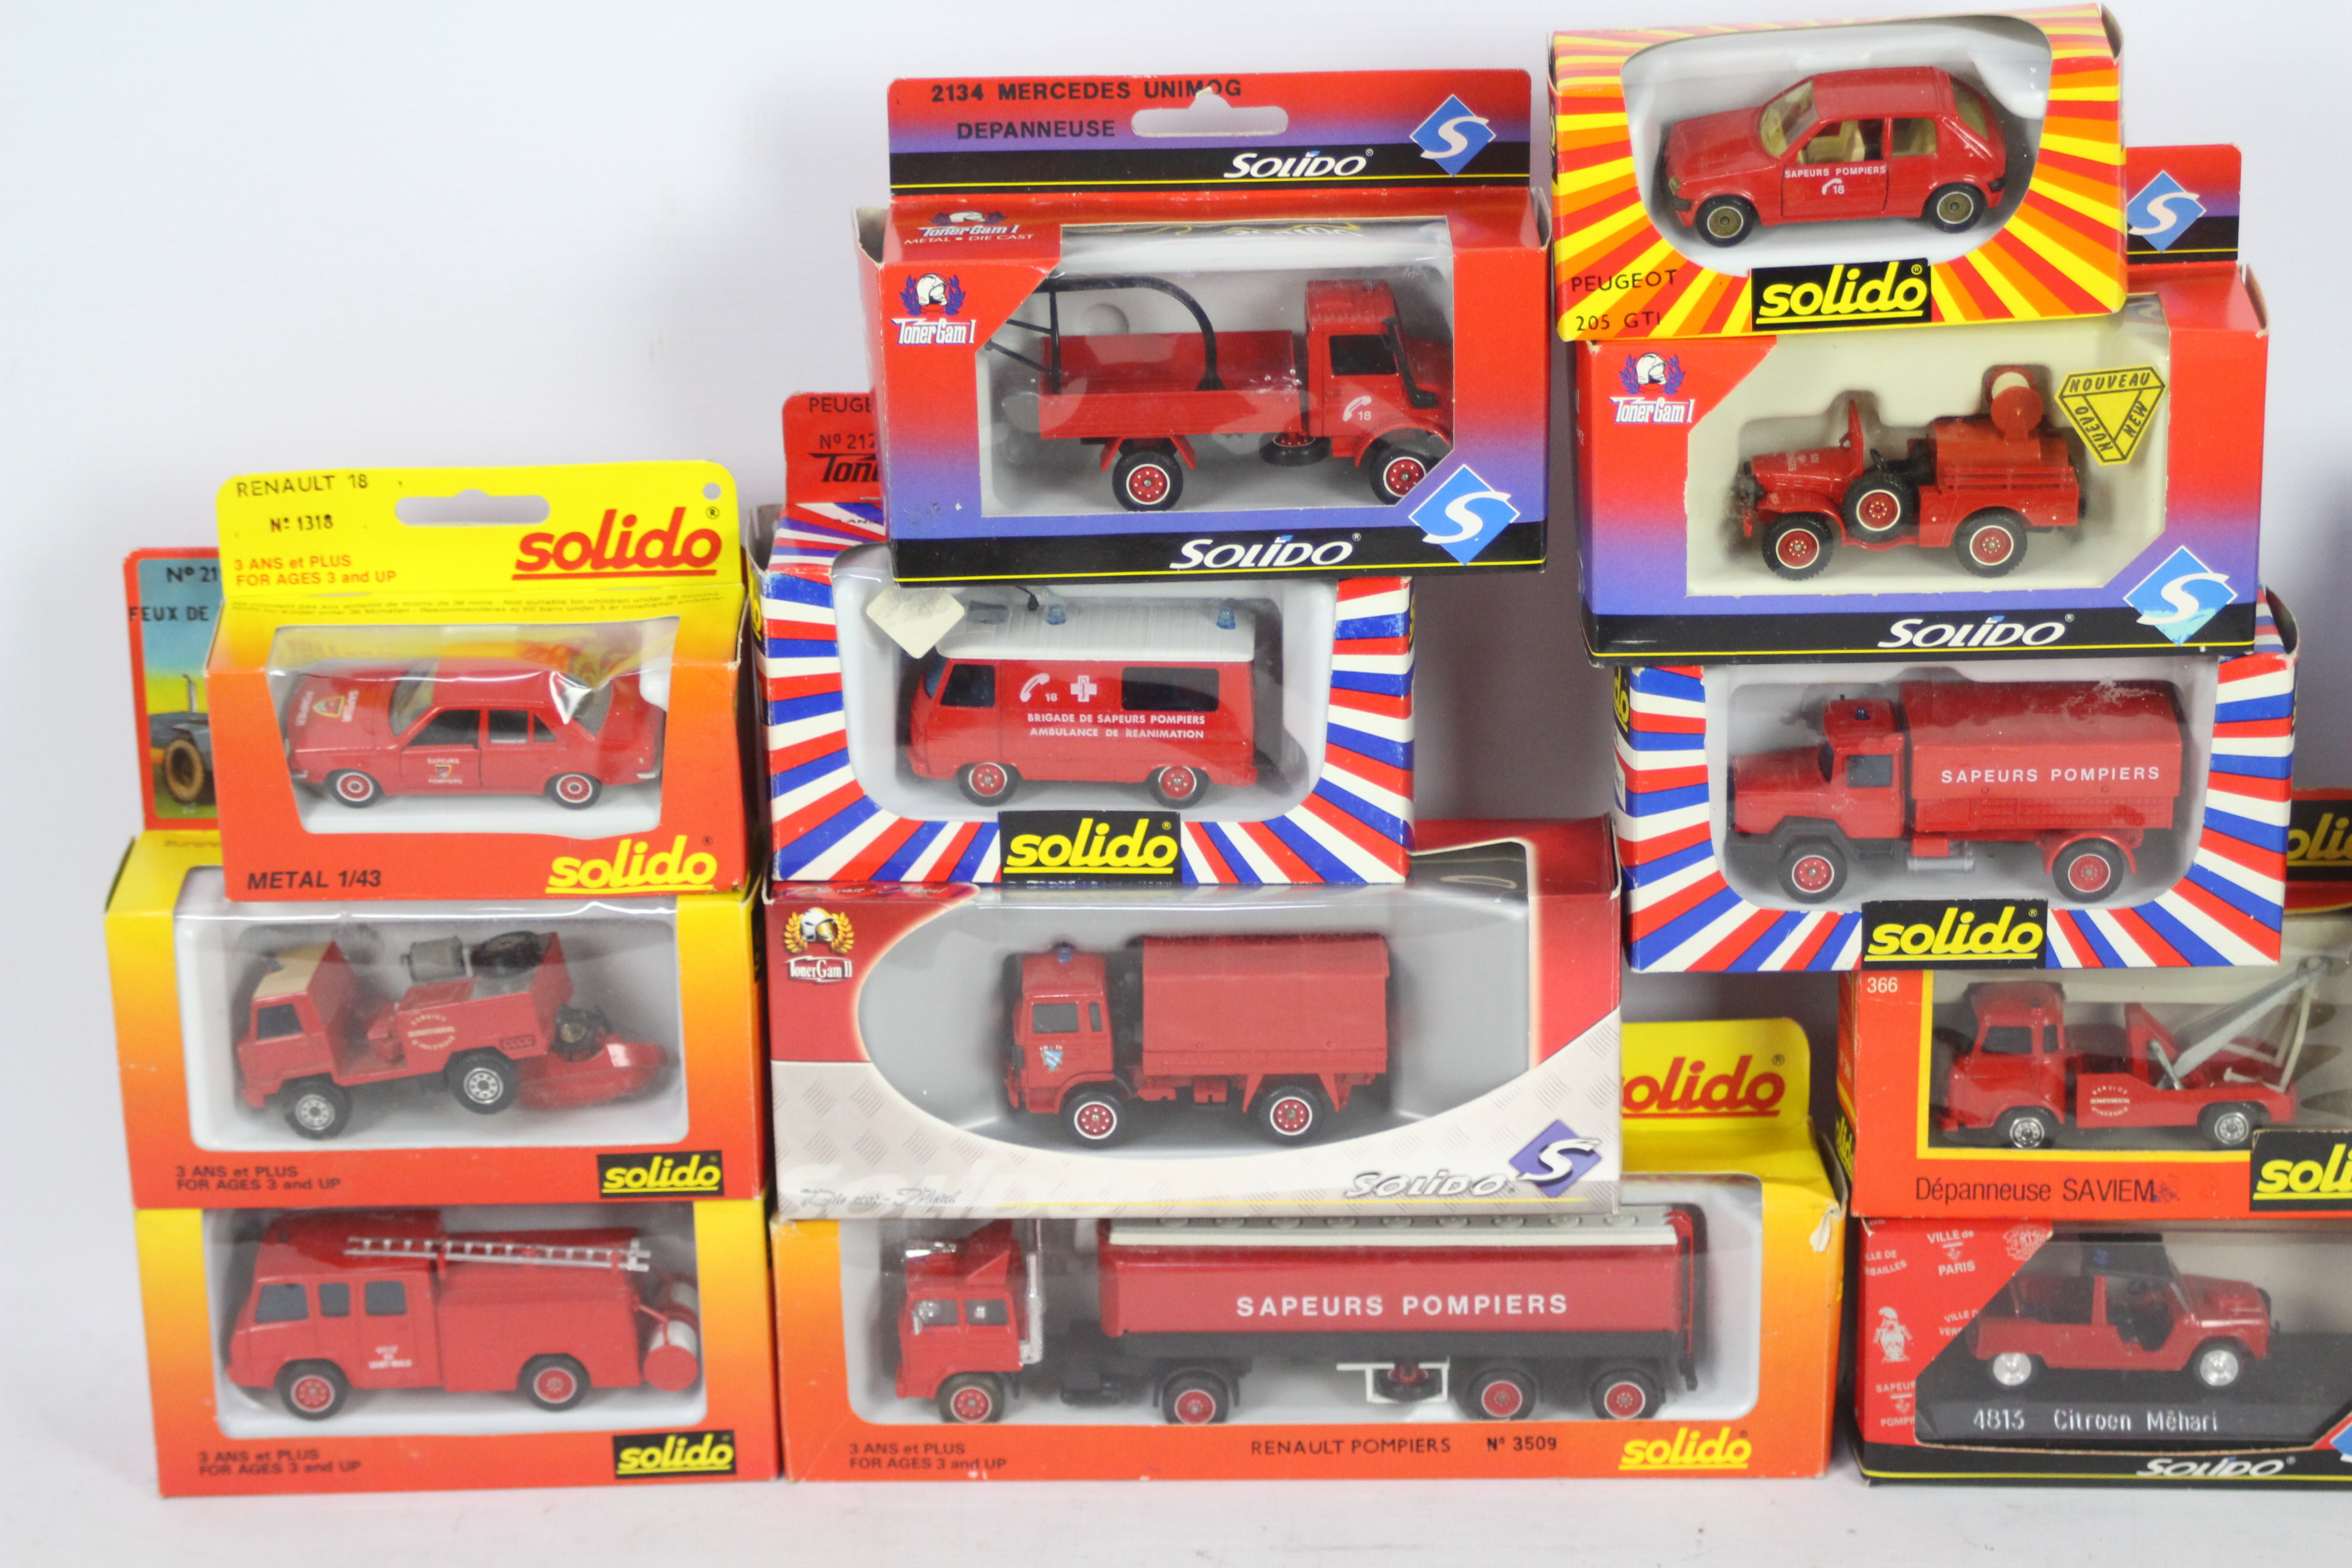 Solido - 15 boxed diecast model Fire Appliance / Vehicles from Solido. - Image 2 of 3